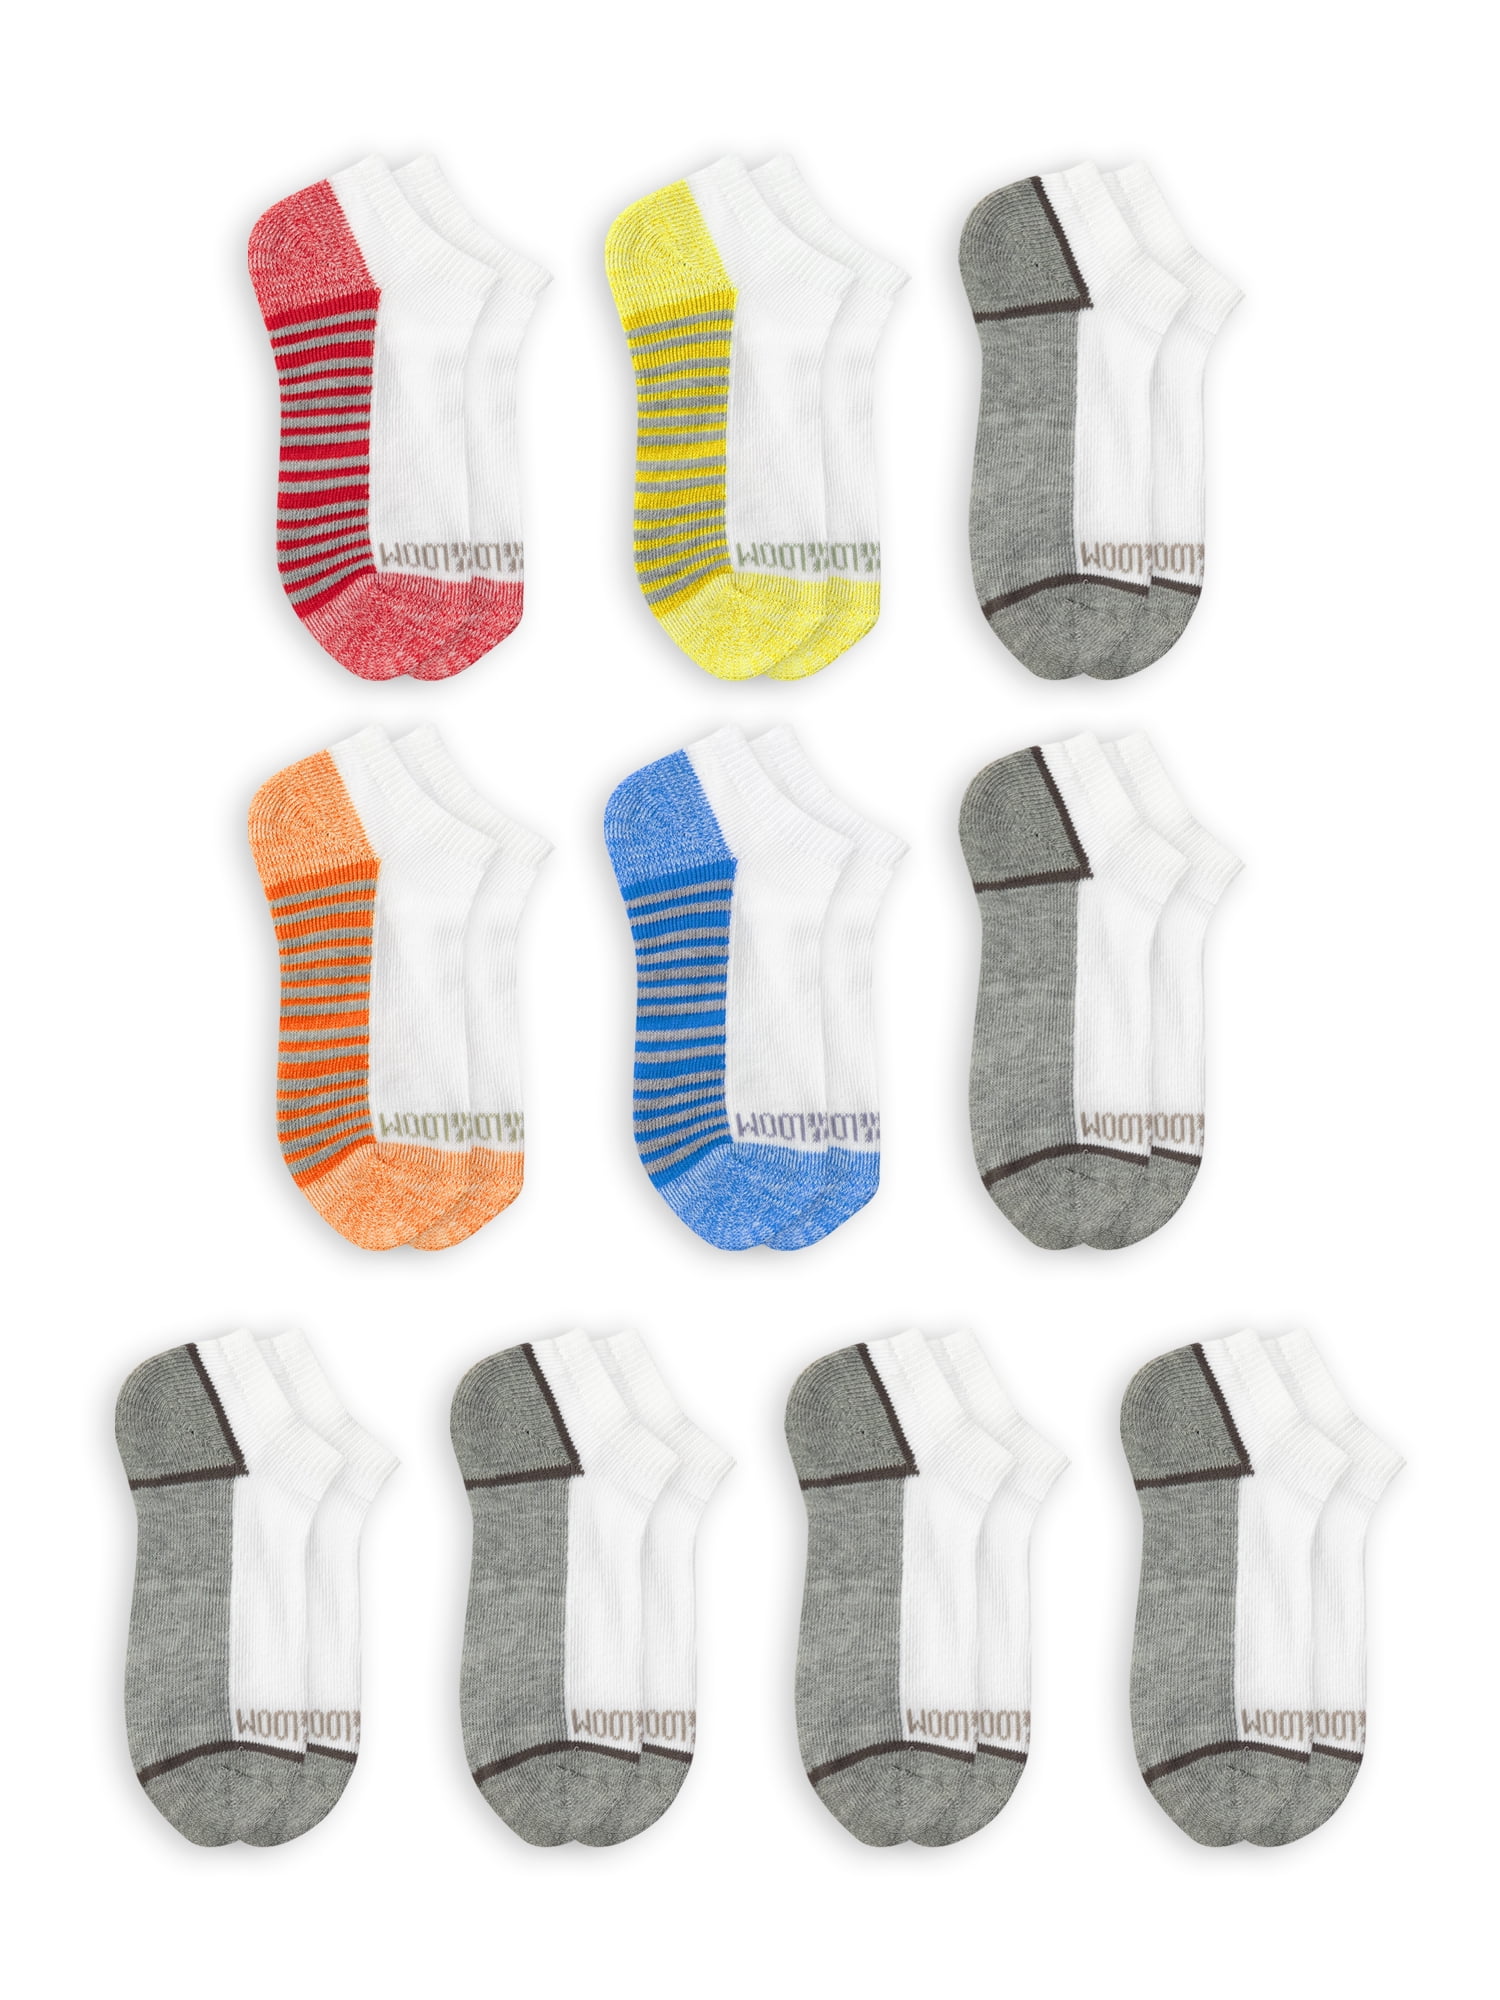 Fruit of the Loom Boys Socks, No Show Zone Cushion 10 Pack Sizes S - L ...